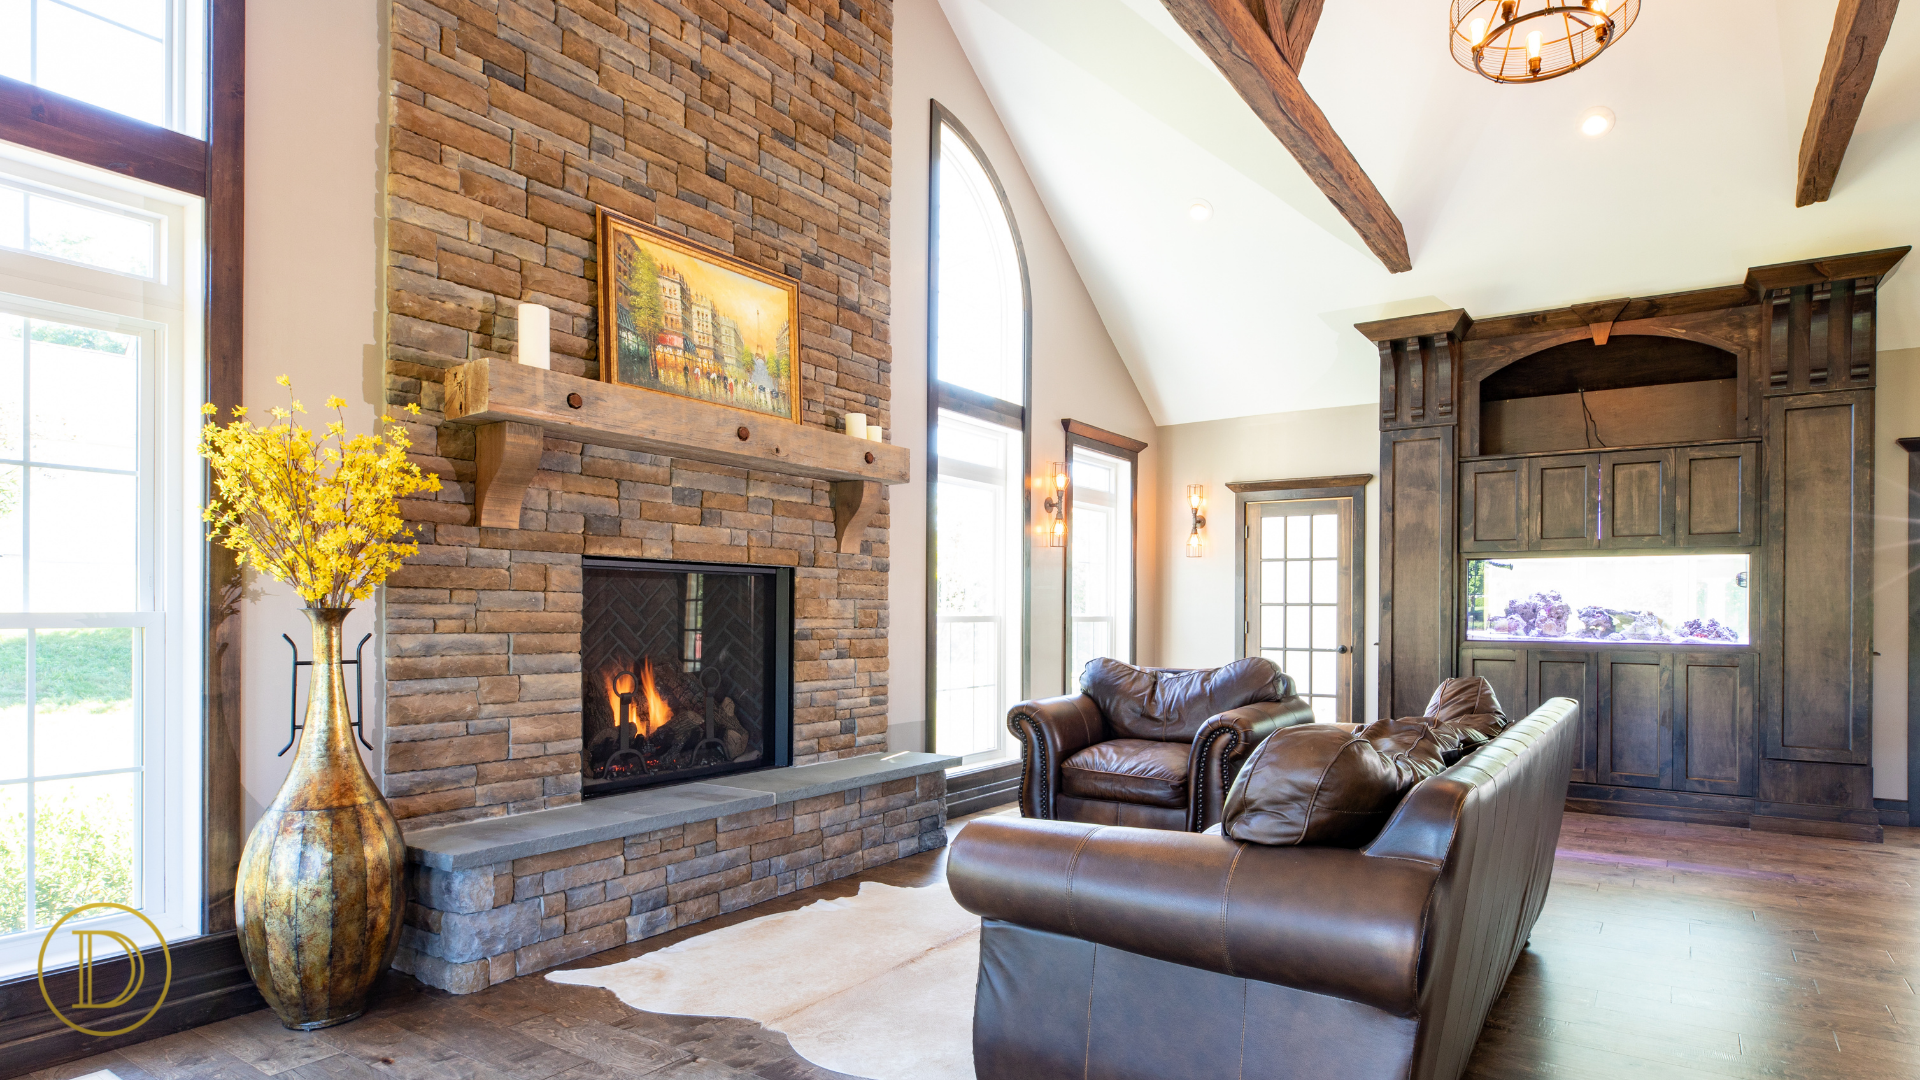 Carpentry Job - Custom living room addition with stone veneer fireplace and access to sunroom